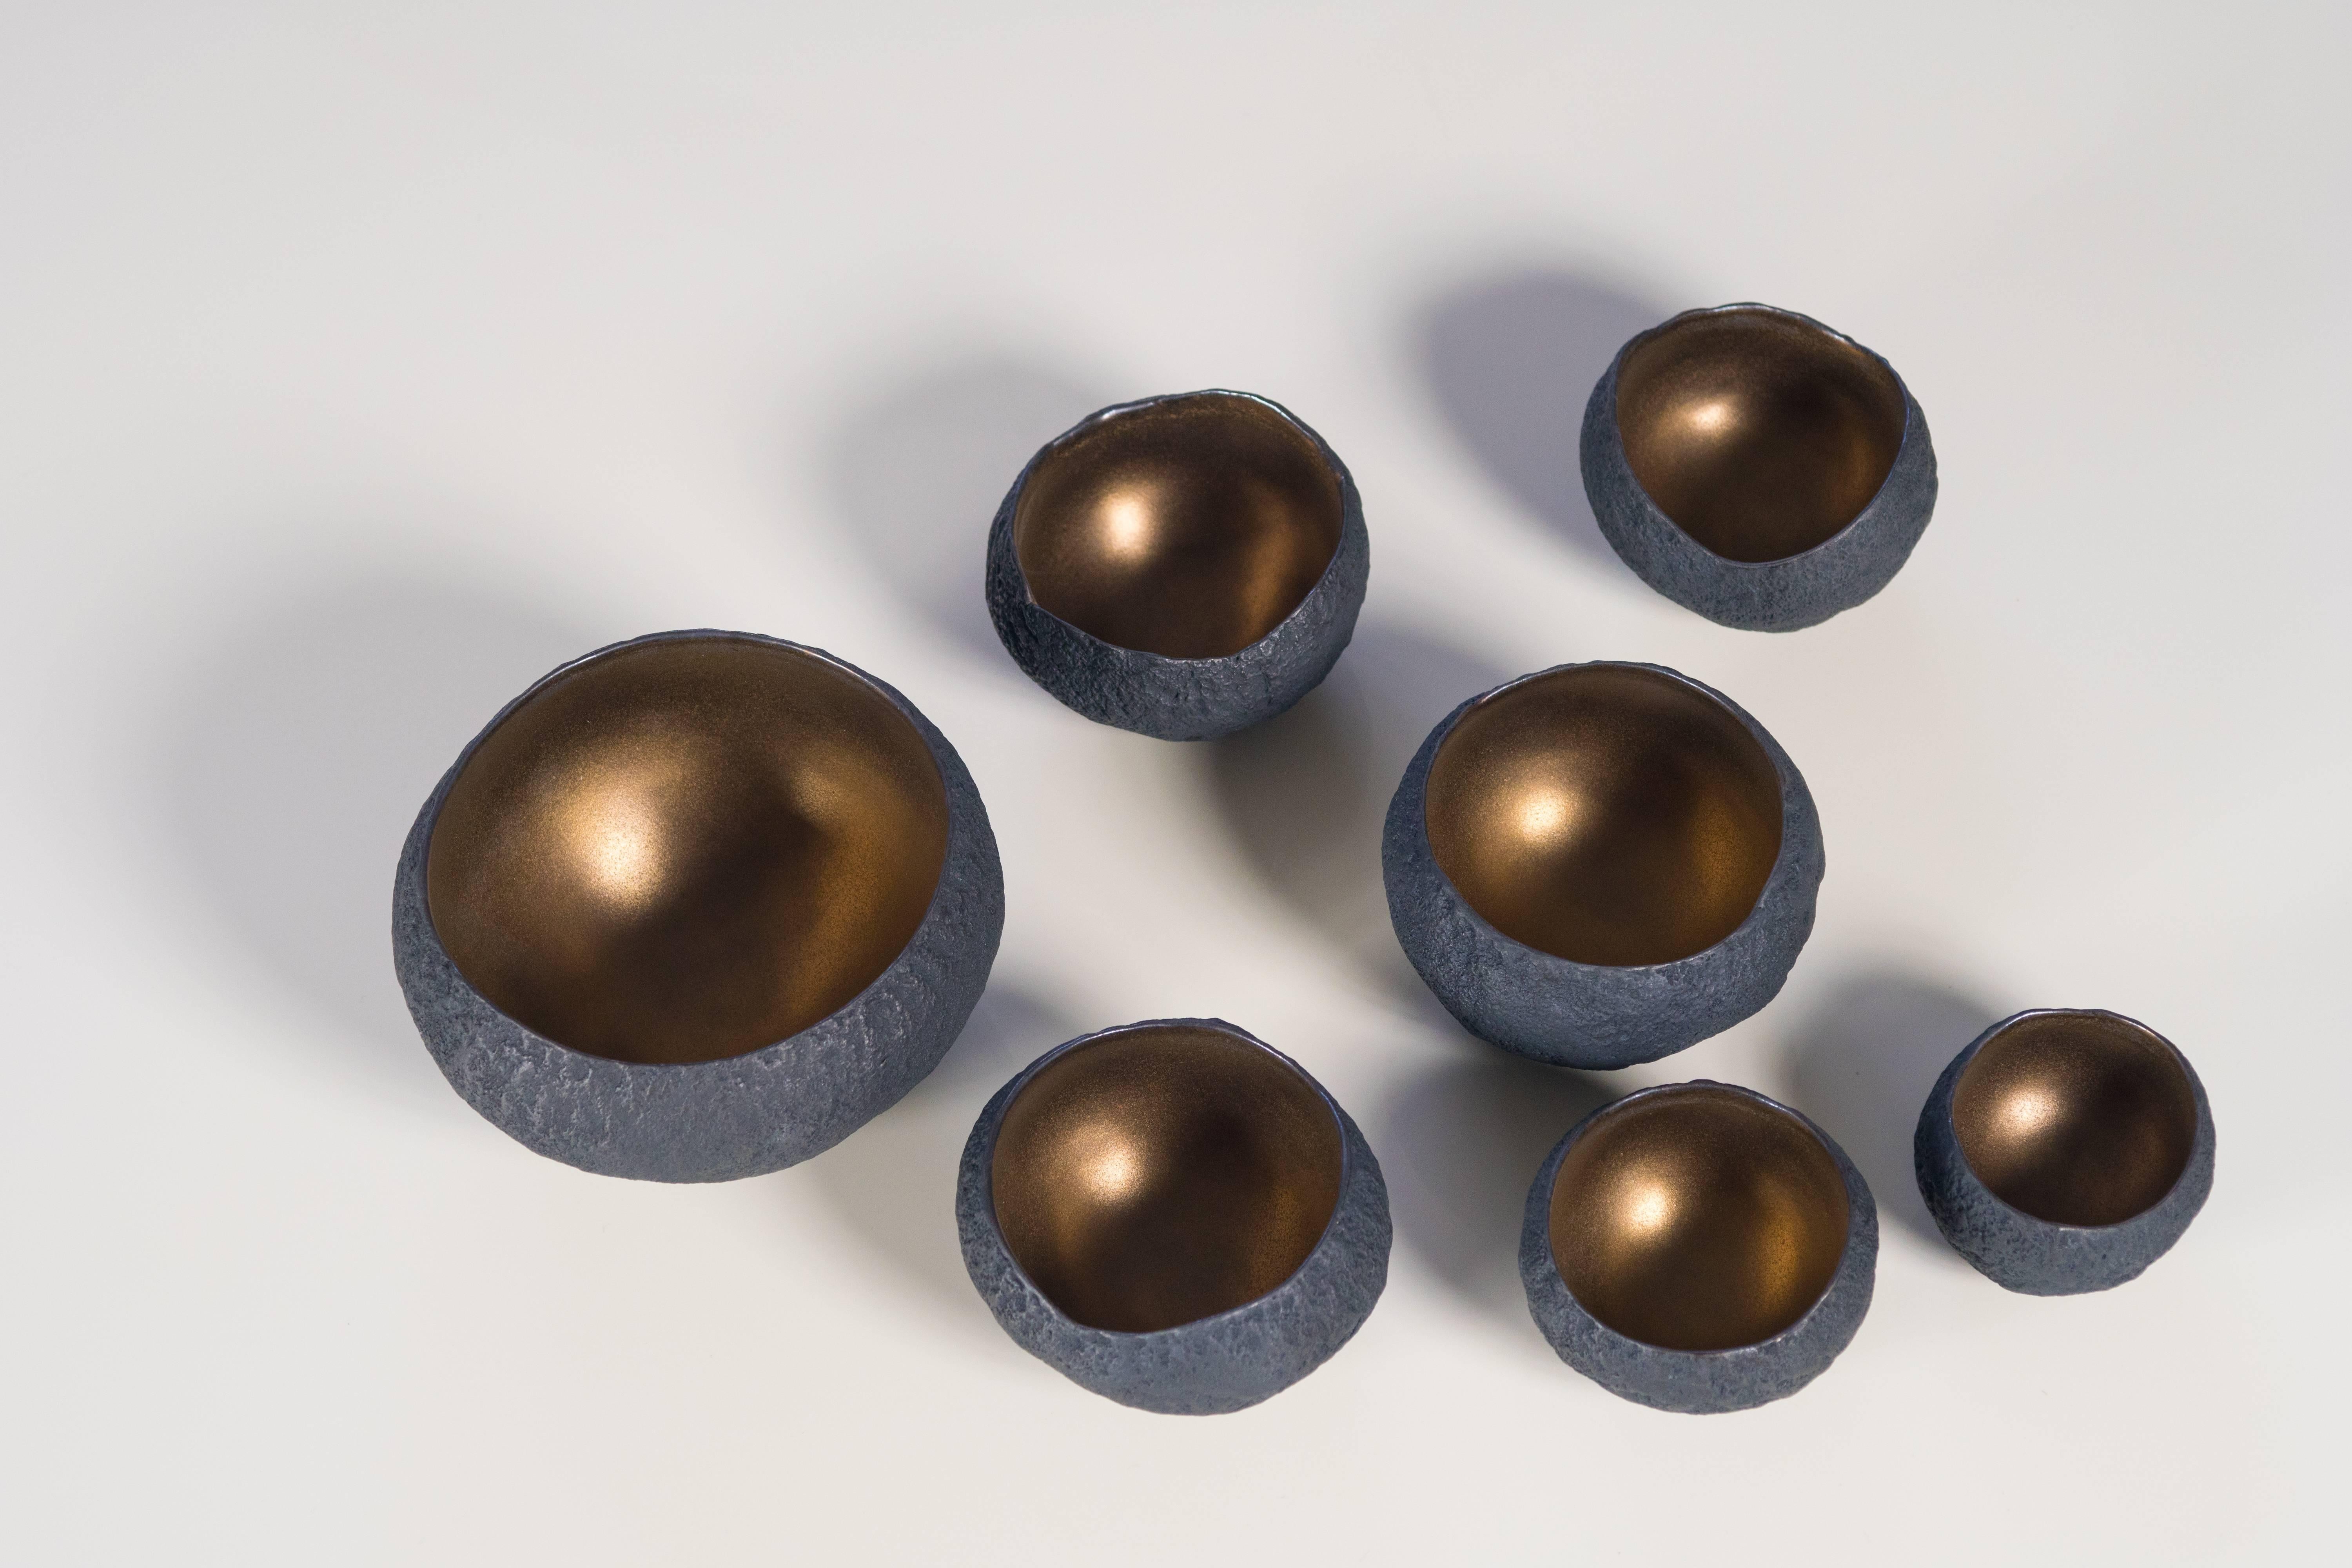 12 small and medium size bowls with bronze glaze interiors that can be purchased individually or as a 

Beginning with a ball of clay, she pinches it into vessels and textures them with stone fragments. After multiple firing it was glazed and